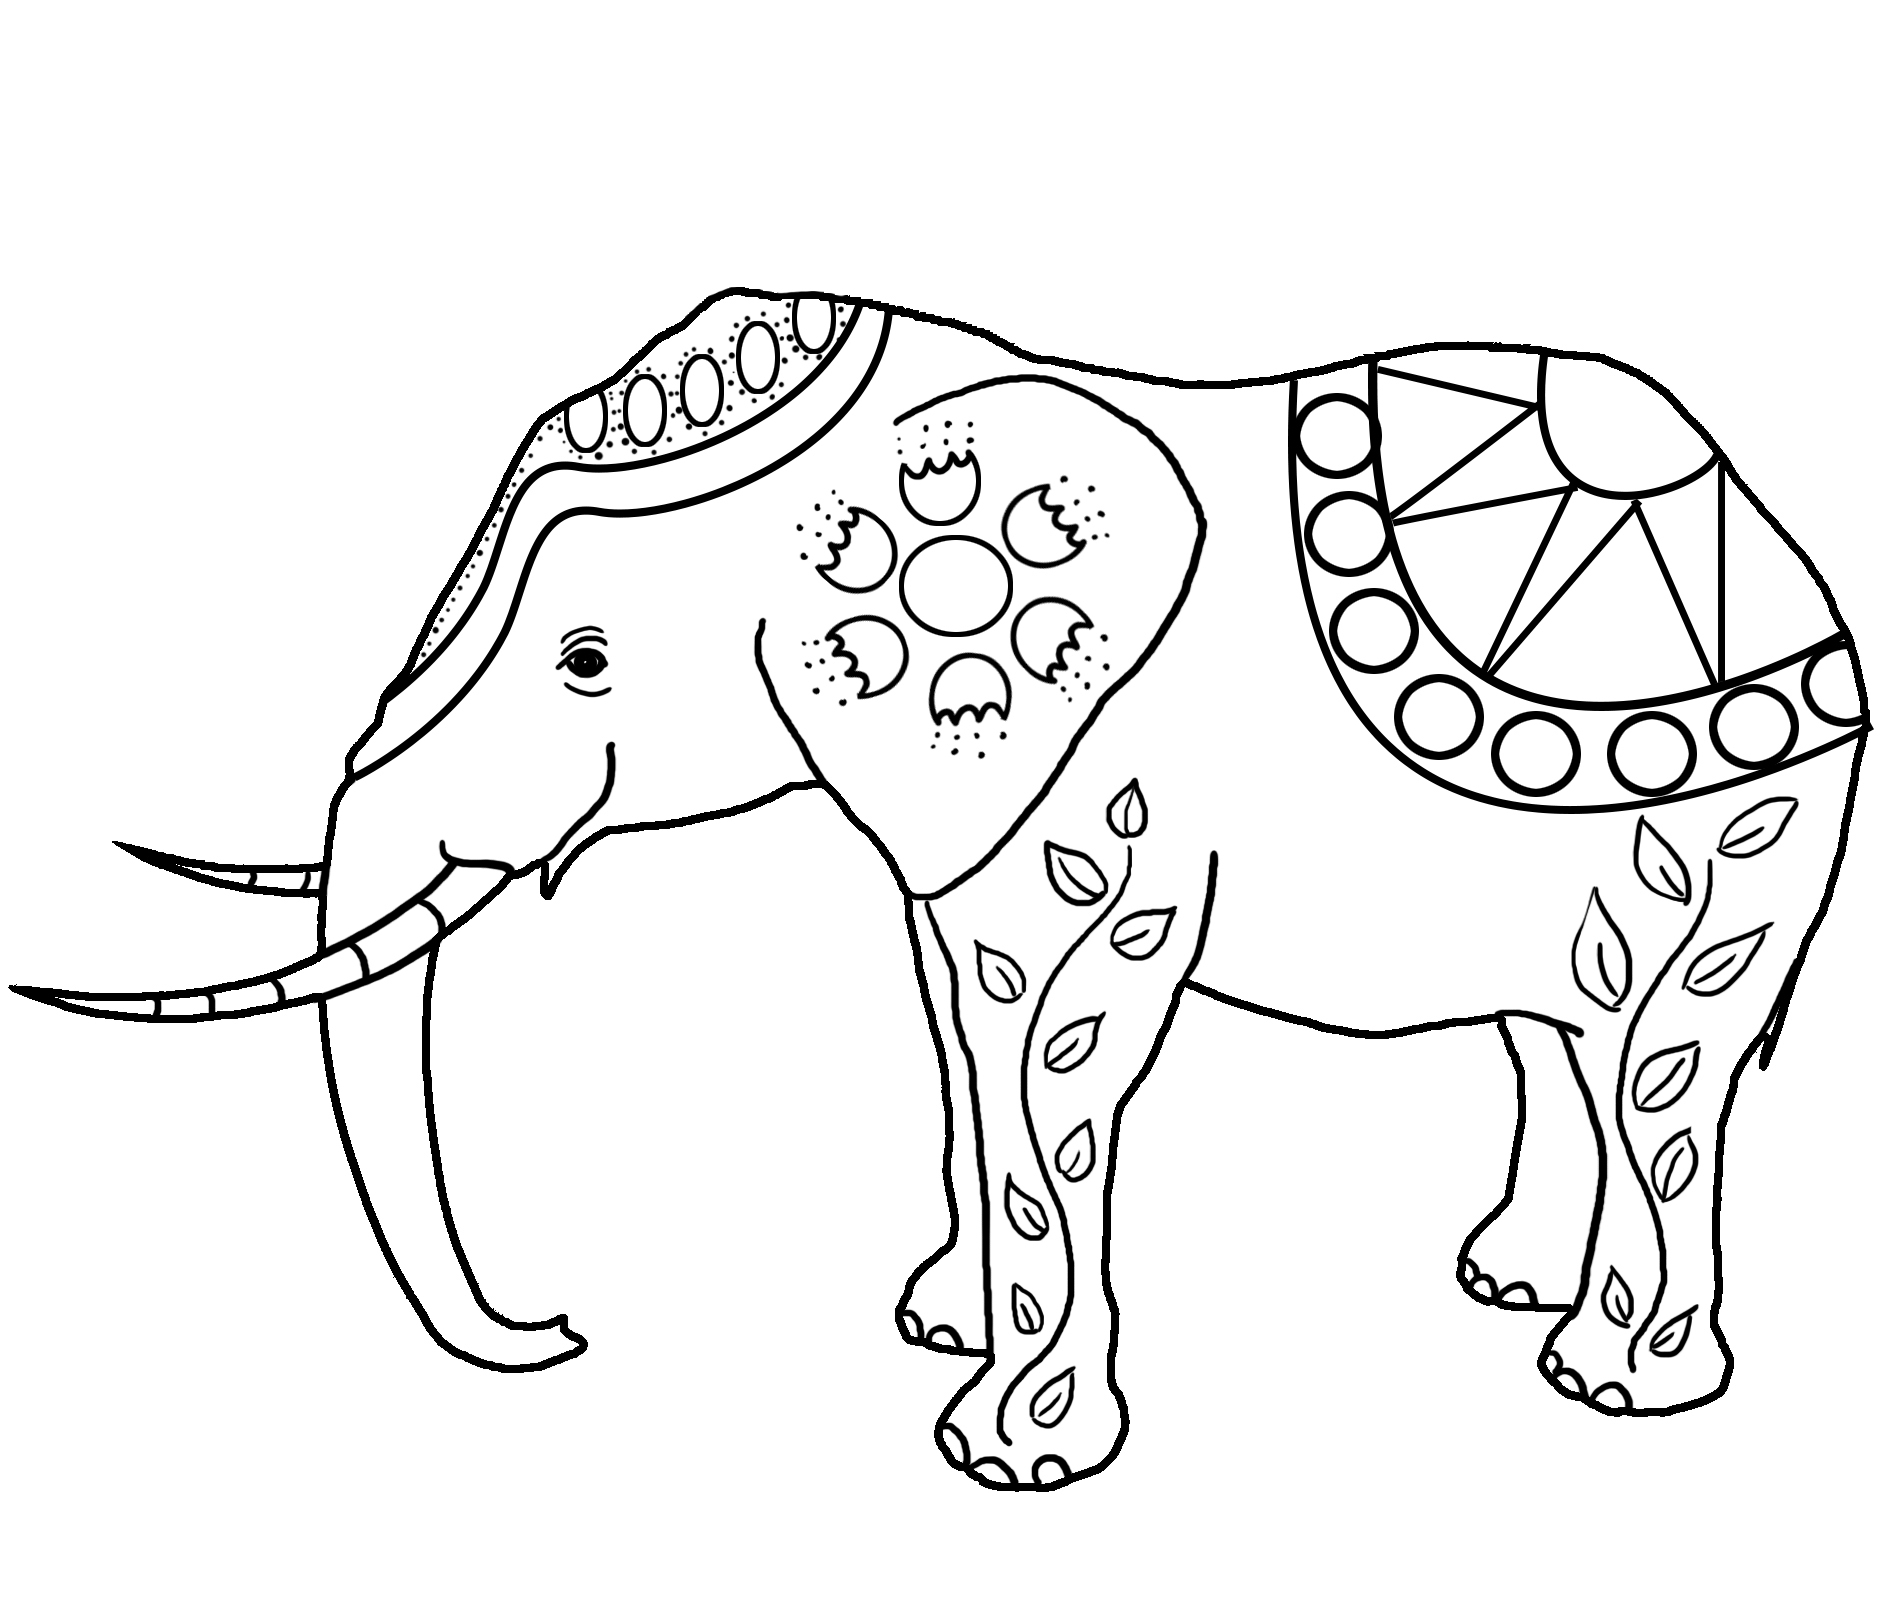 decorated elephant drawing for coloring